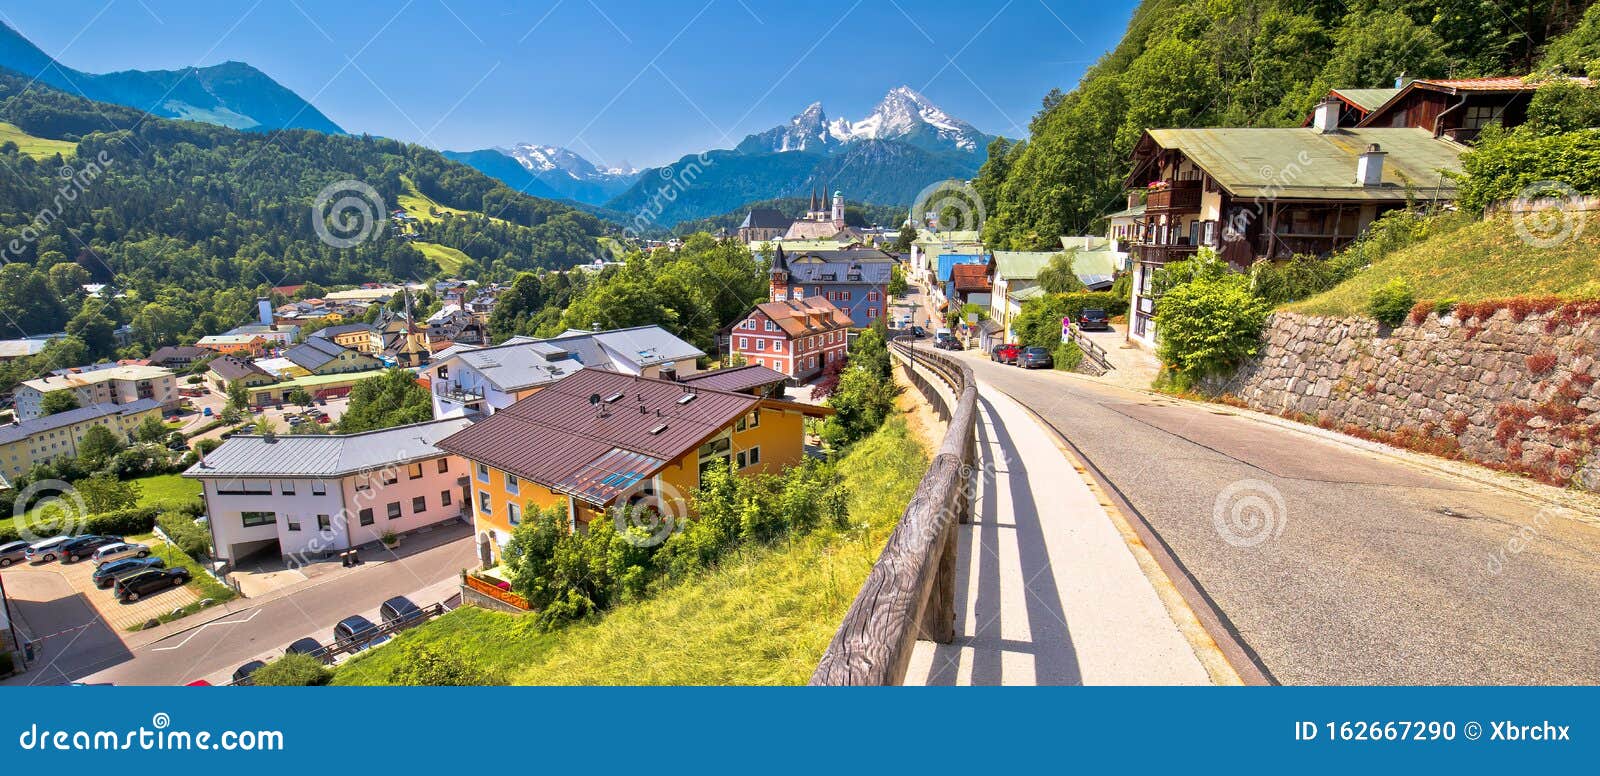 town of berchtesgaden and alpine landscape panoramic view